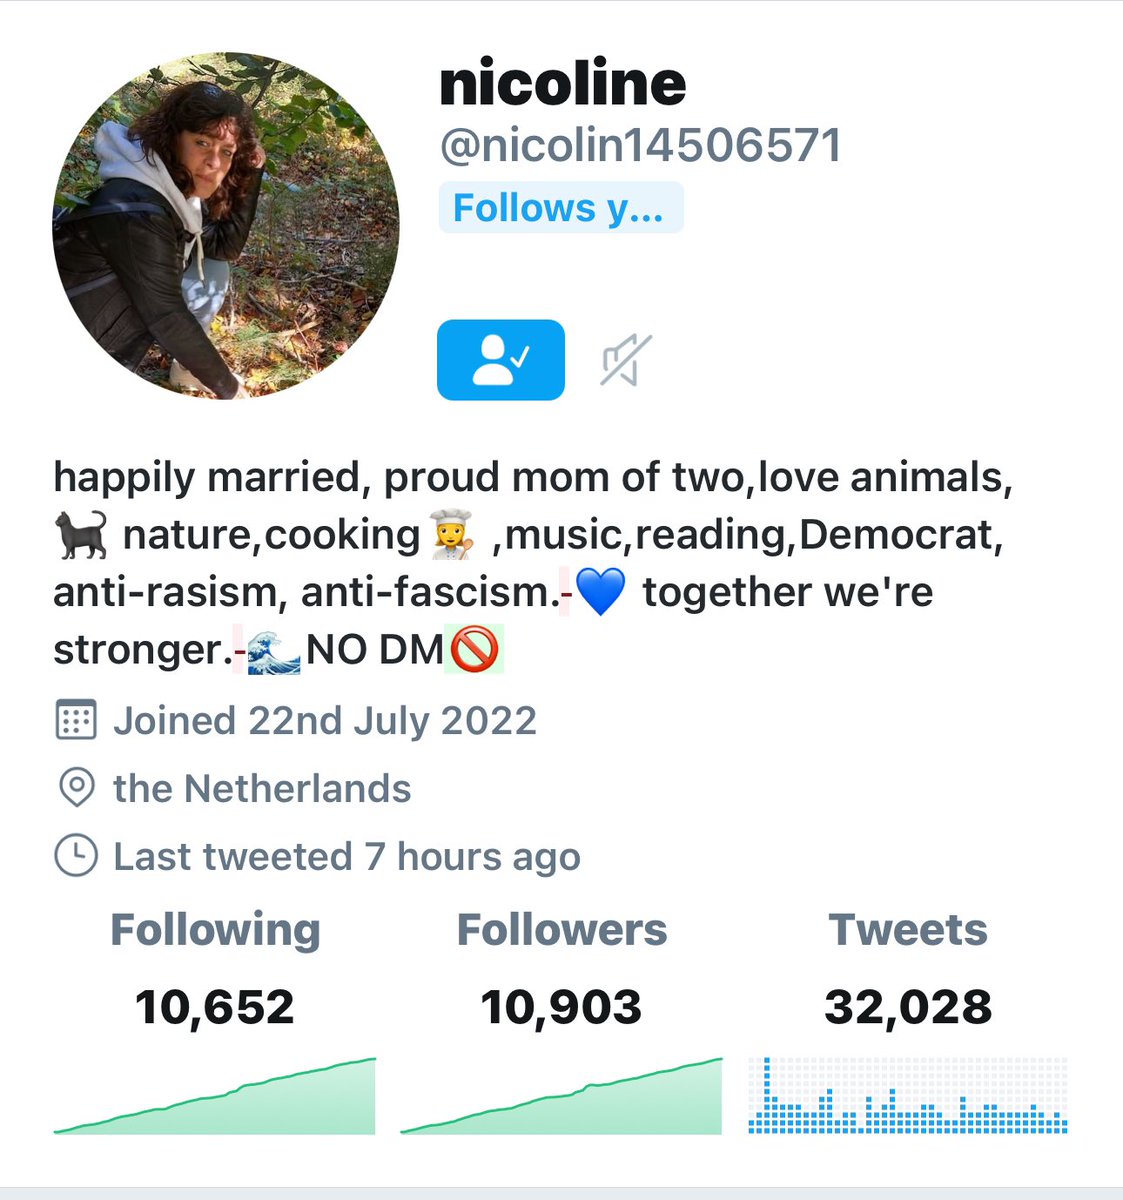 Nicoline @nicolin14506571 only needs 97 more likeminded friends to reach 11K 💙REPOST💙